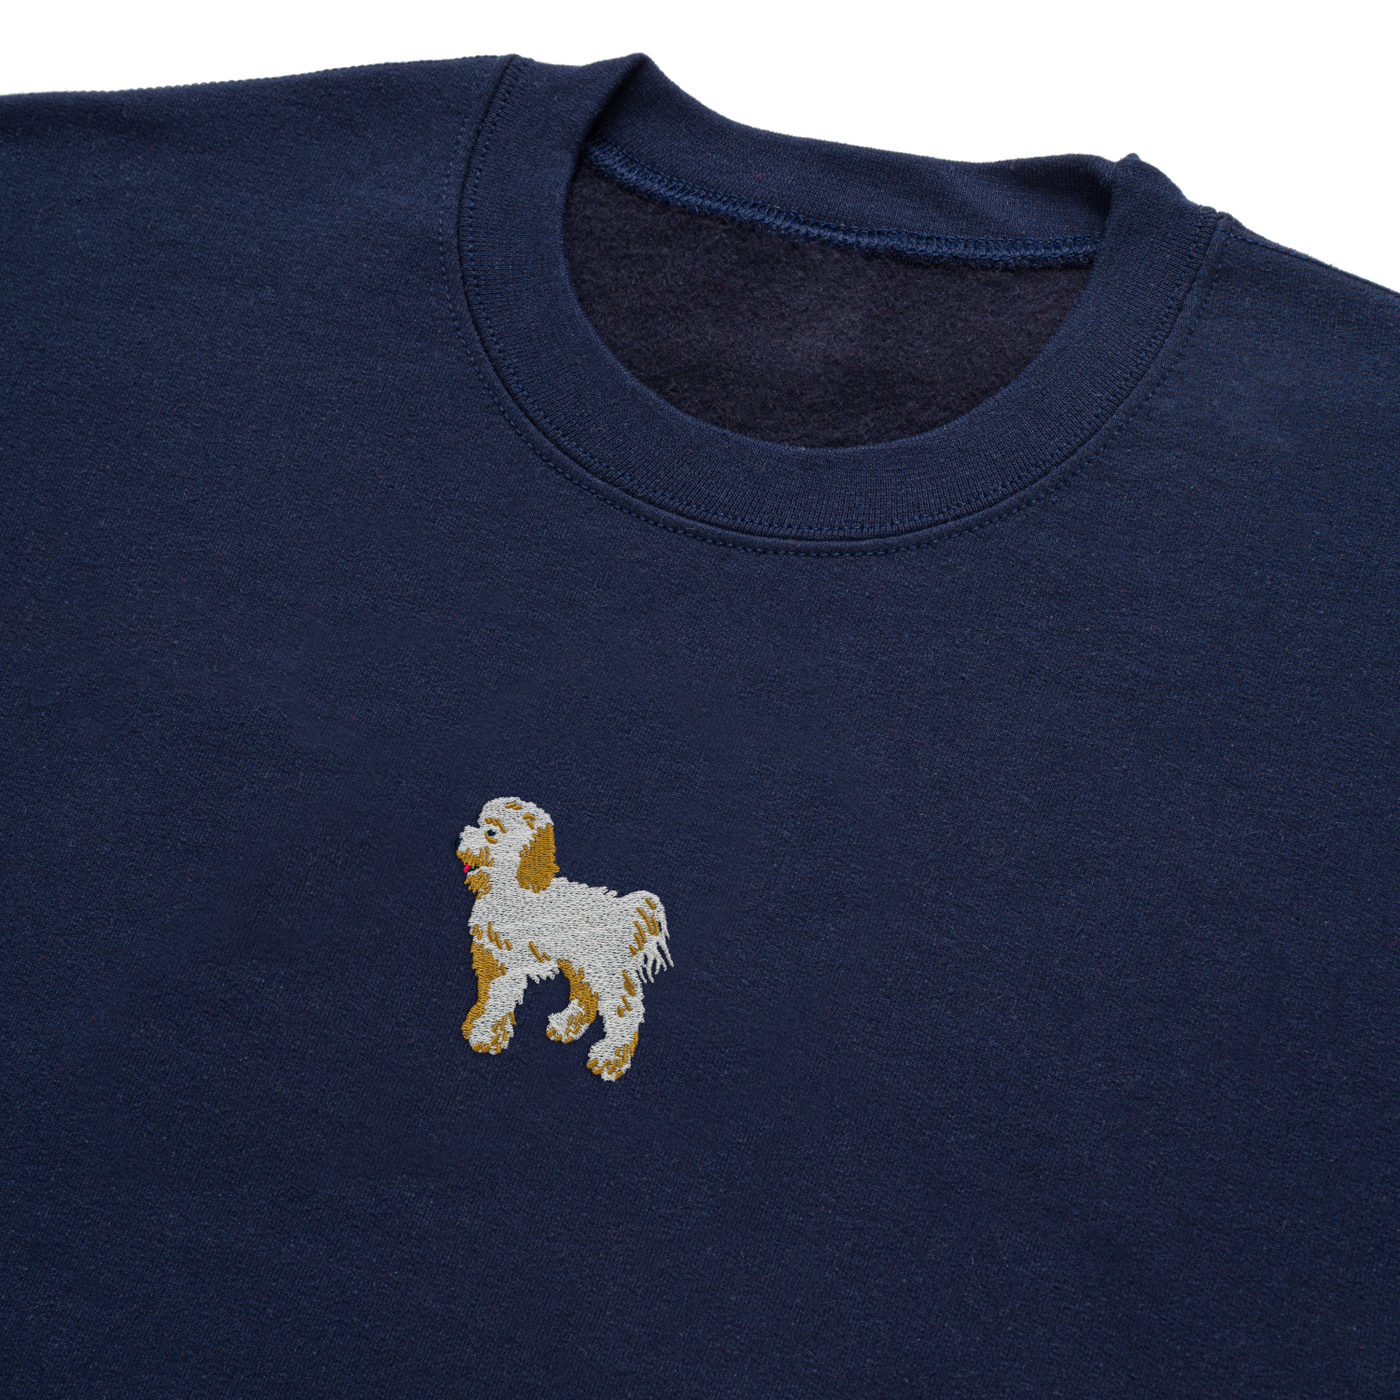 Bobby's Planet Women's Embroidered Poodle Sweatshirt from Bobbys Planet Toy Poodle Collection in Navy Color#color_navy